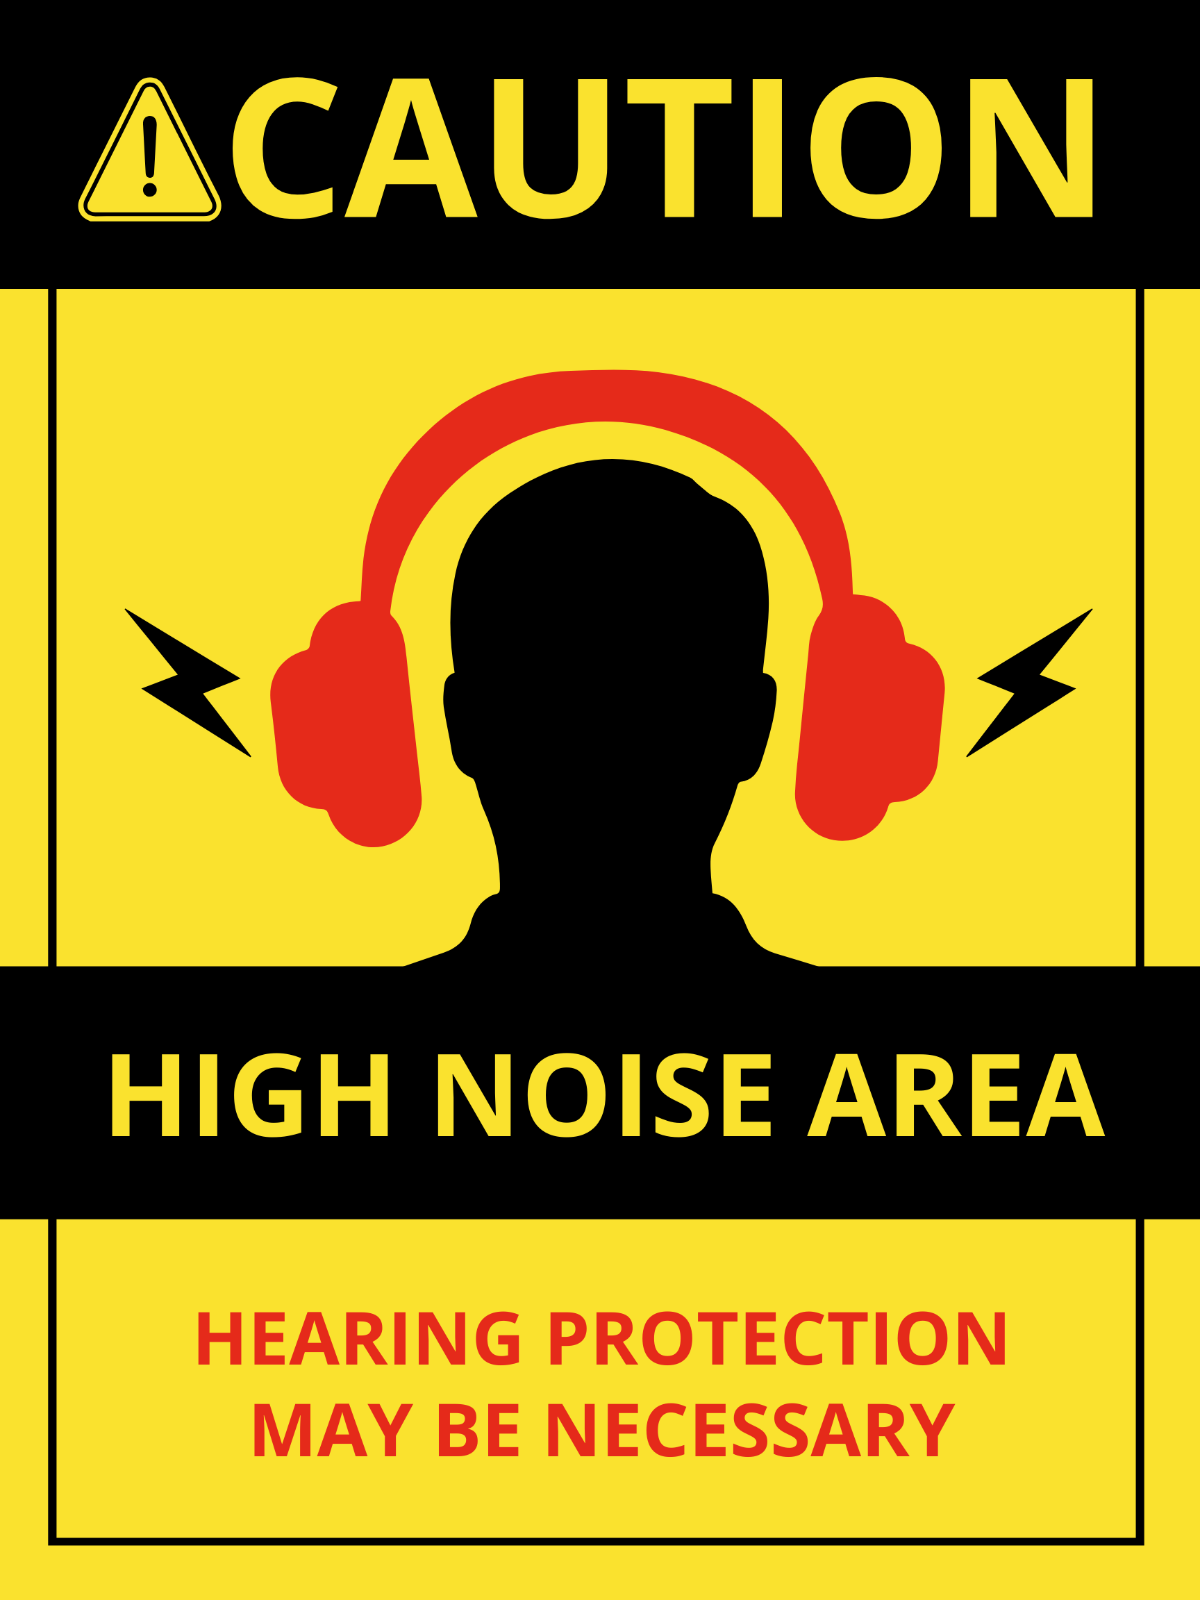 Caution - High Noise Area Hearing Protection May Be Necessary Sign